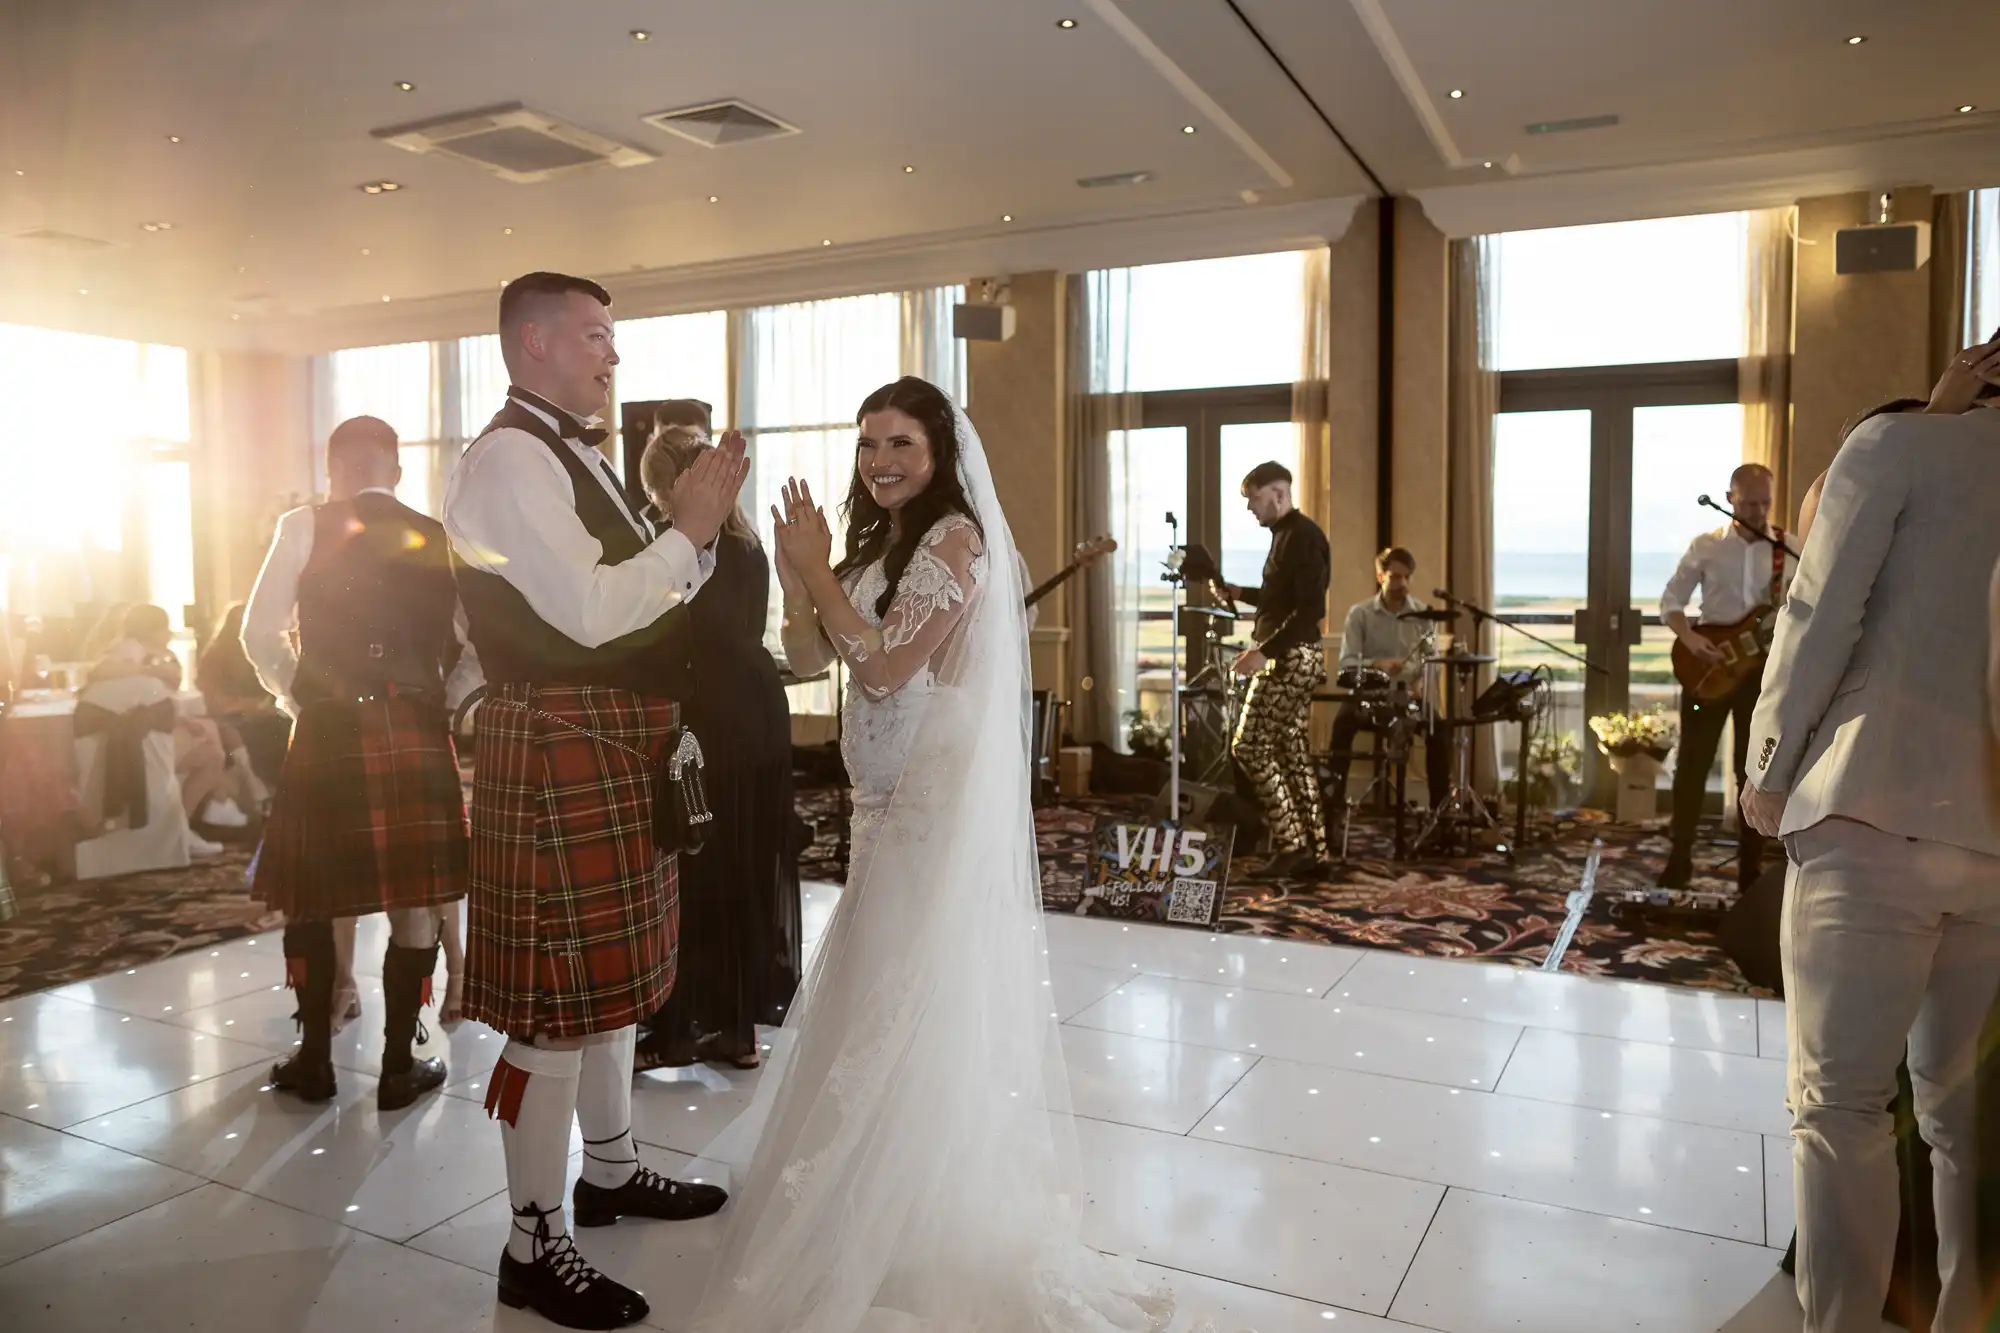 A bride and groom in a joyful dance at a wedding reception, the groom wearing a traditional kilt, with guests and a live band in the background.